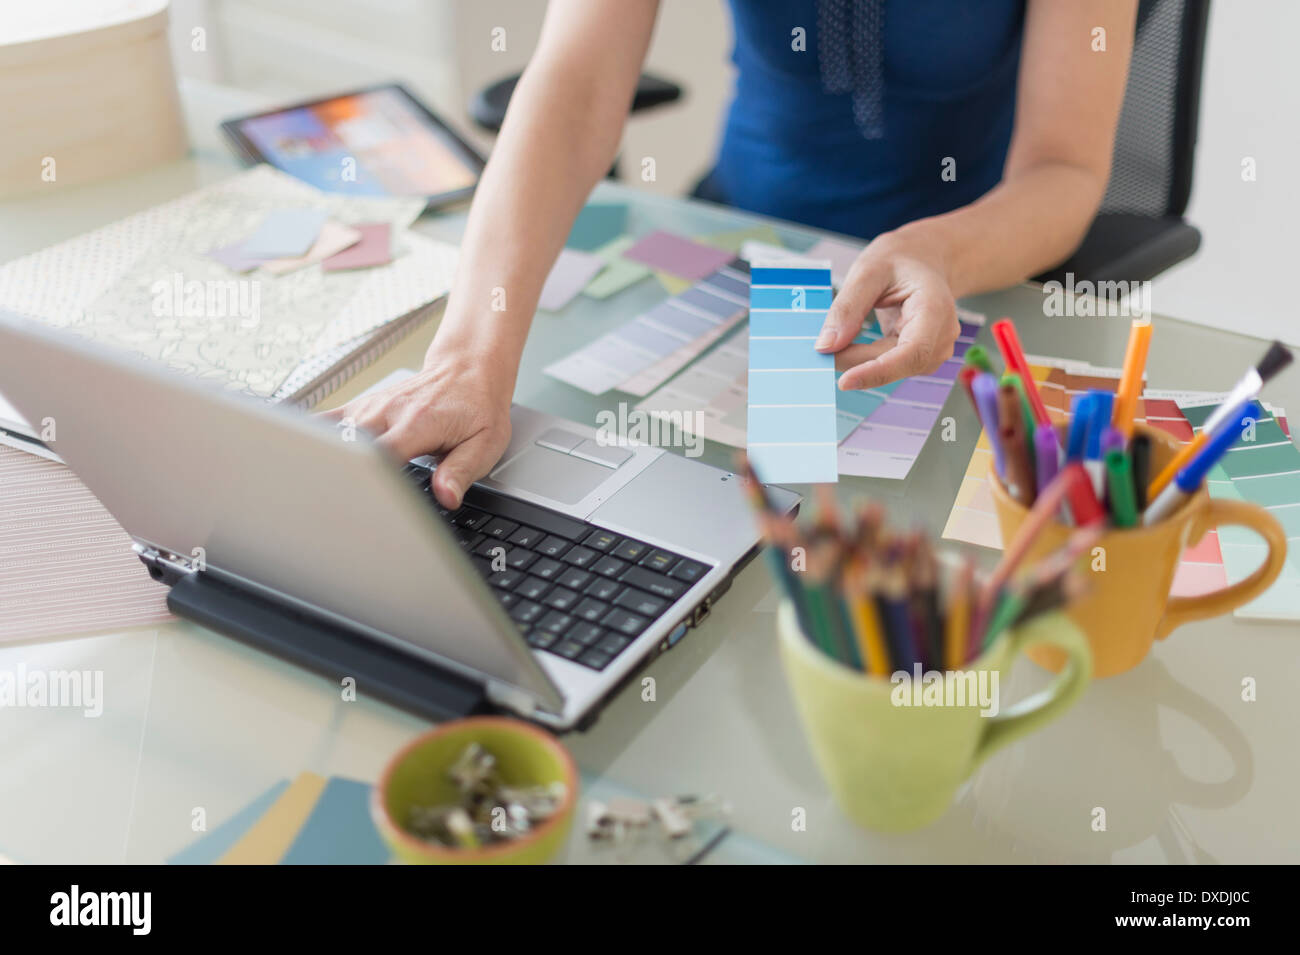 Woman holding color swatches and using laptop Stock Photo